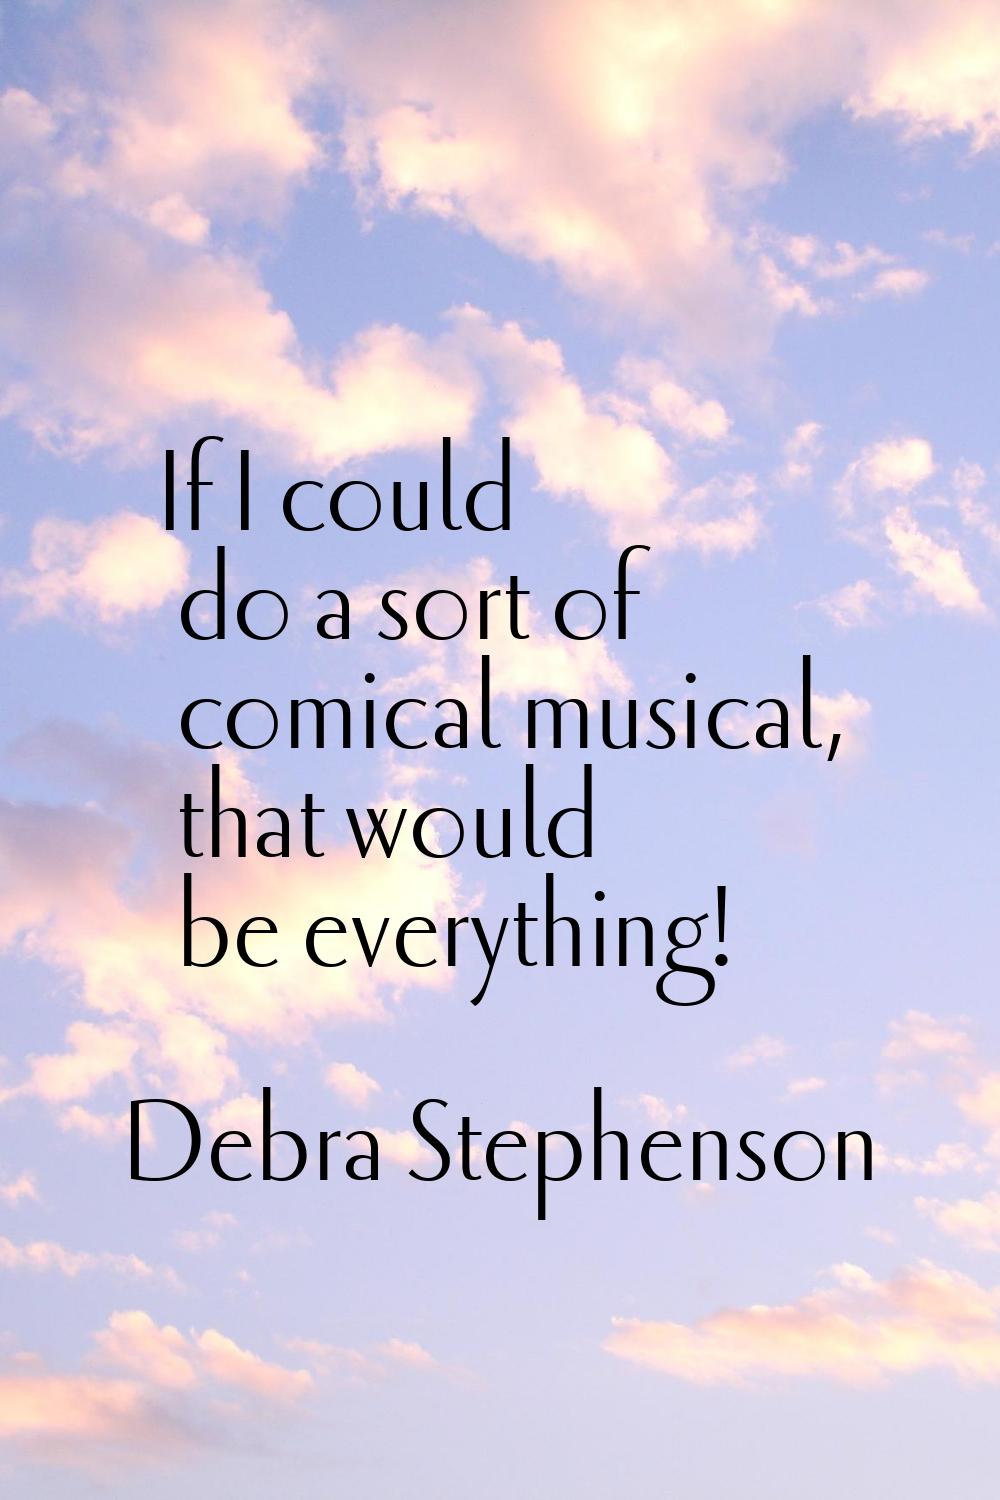 If I could do a sort of comical musical, that would be everything!